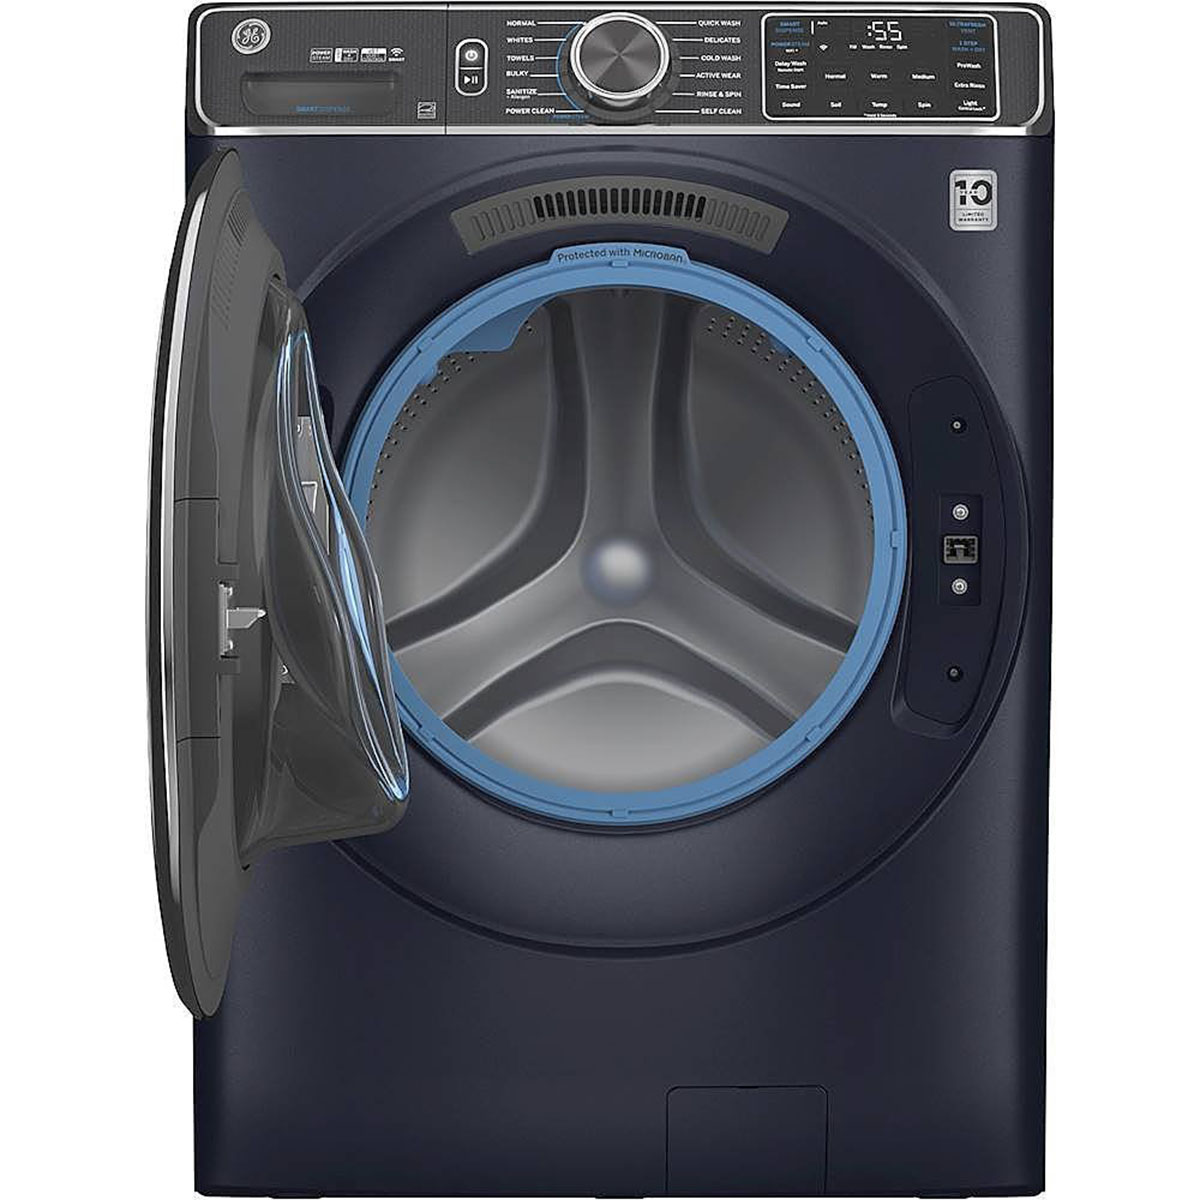 How To Fix The Error Code E51 For GE Washing Machine